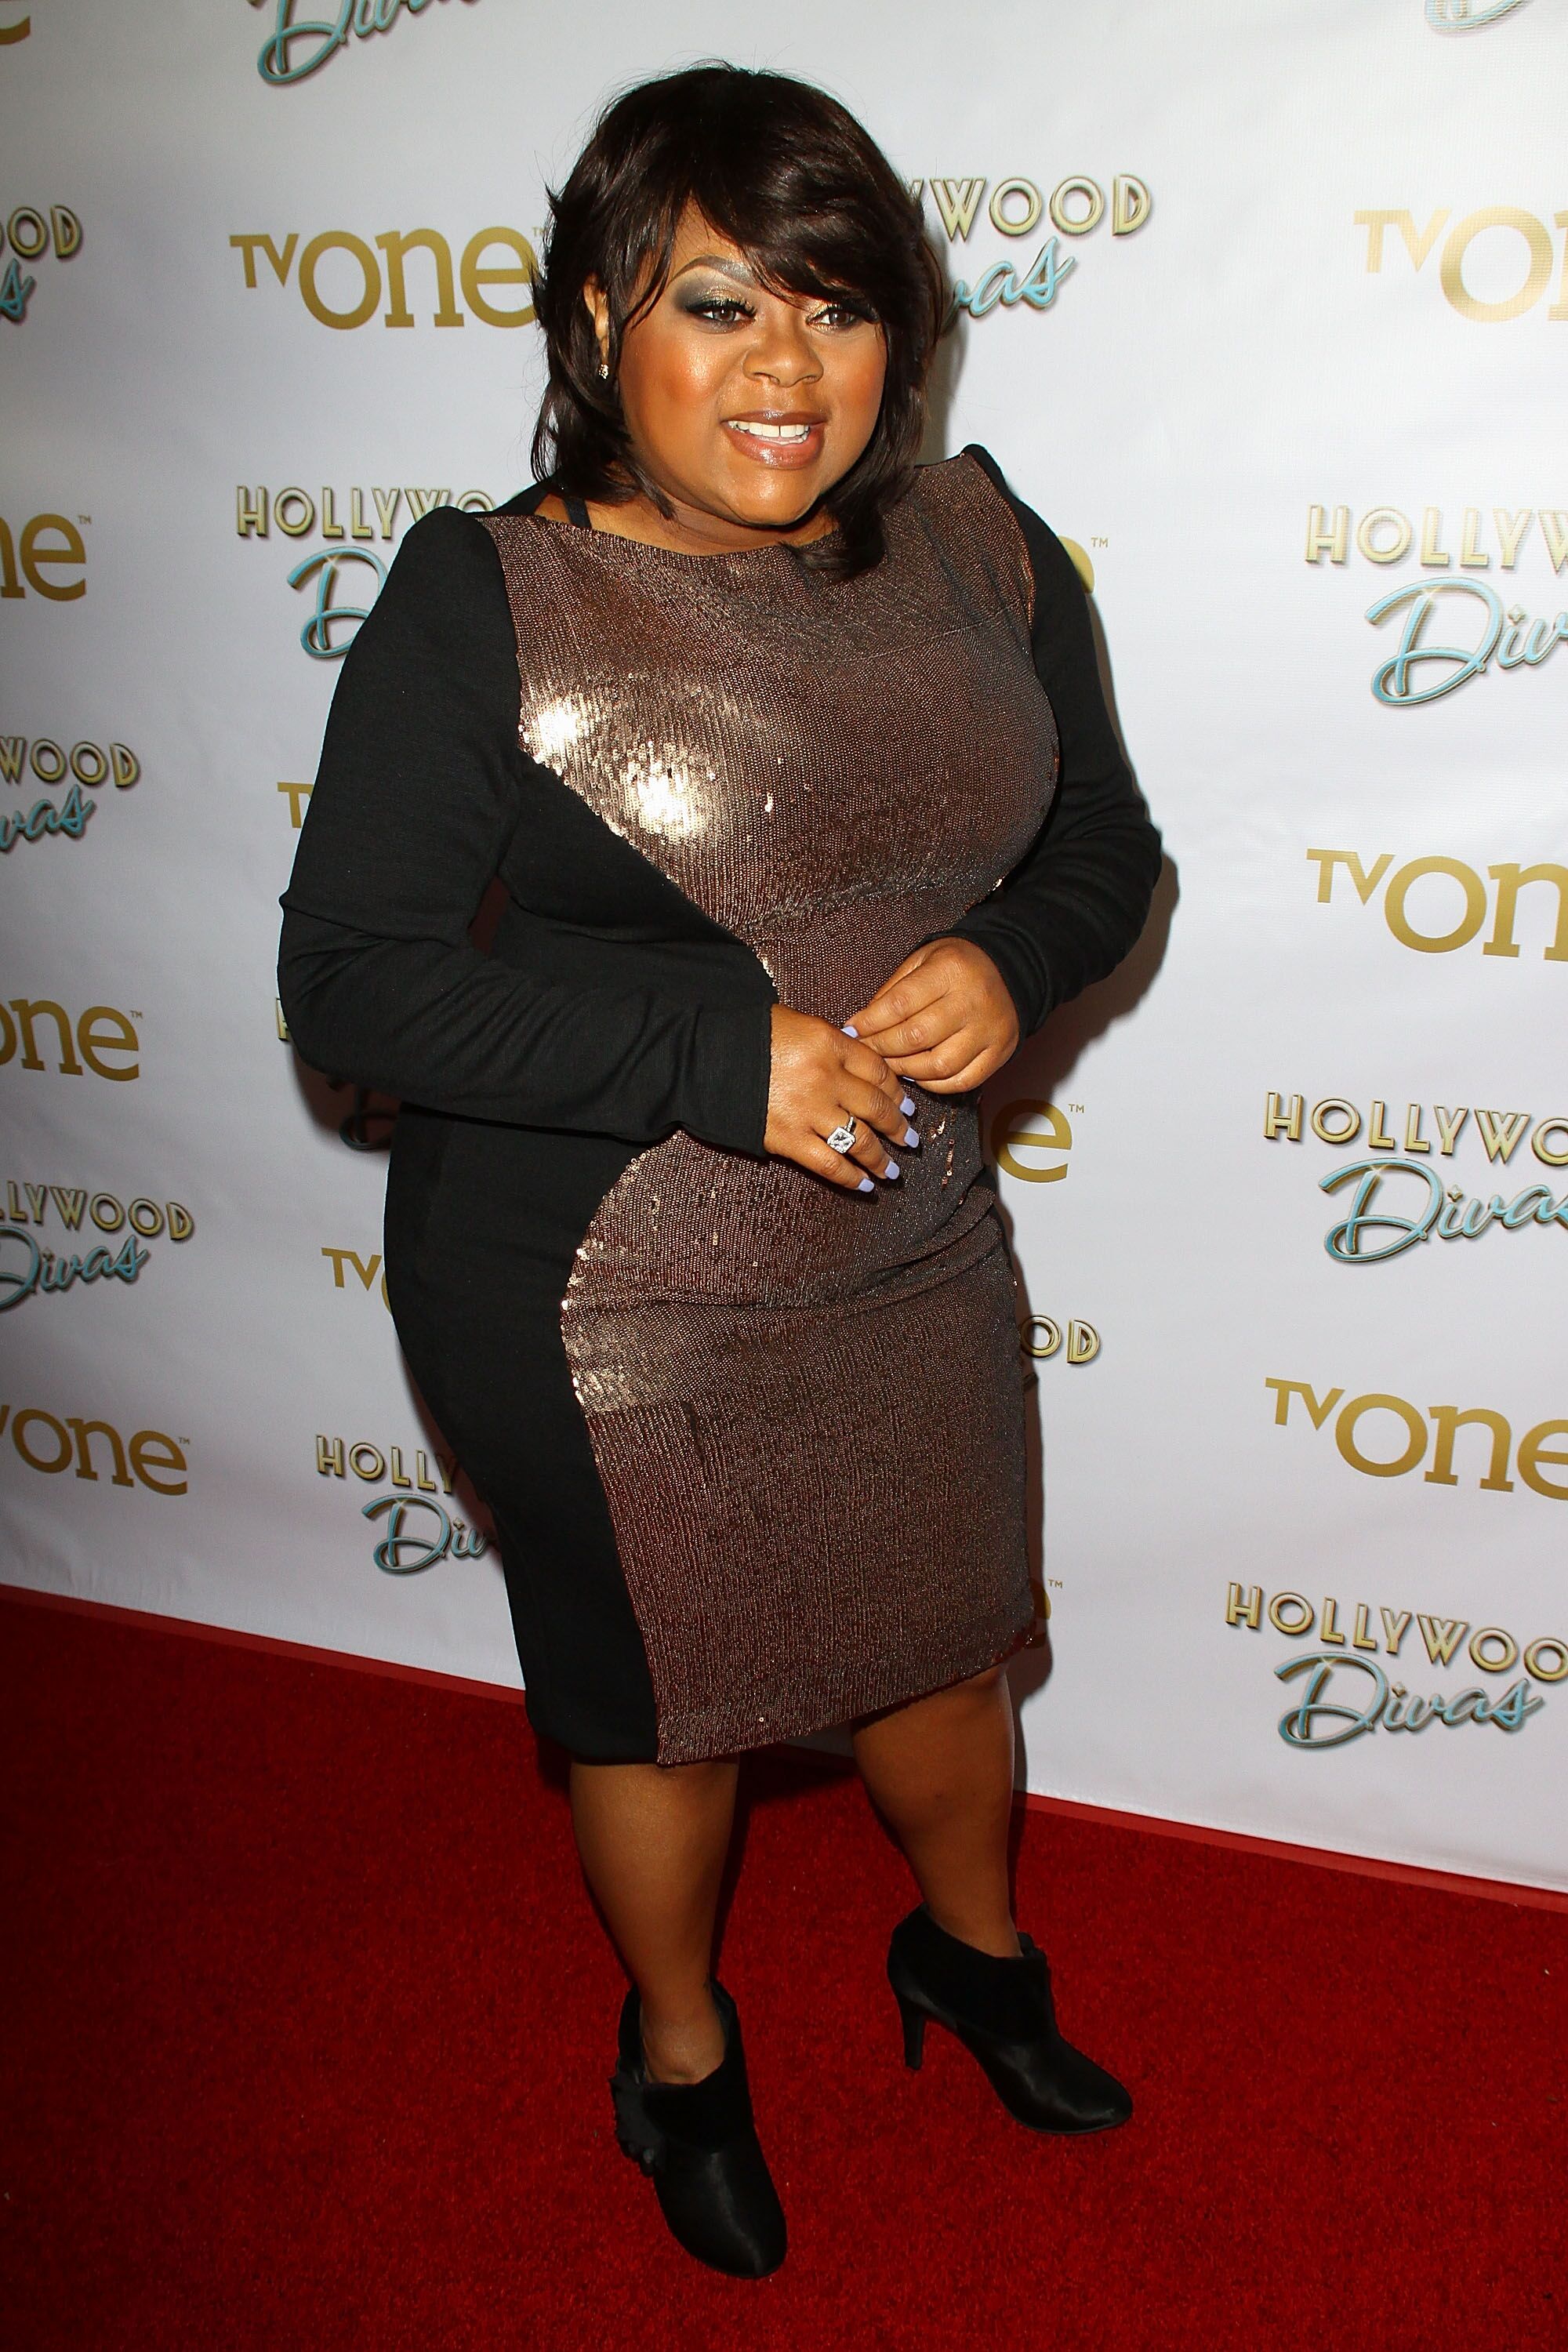 Countess Vaughn attends the premiere party for TV One's 'Hollywood Divas.' | Source: Getty Images